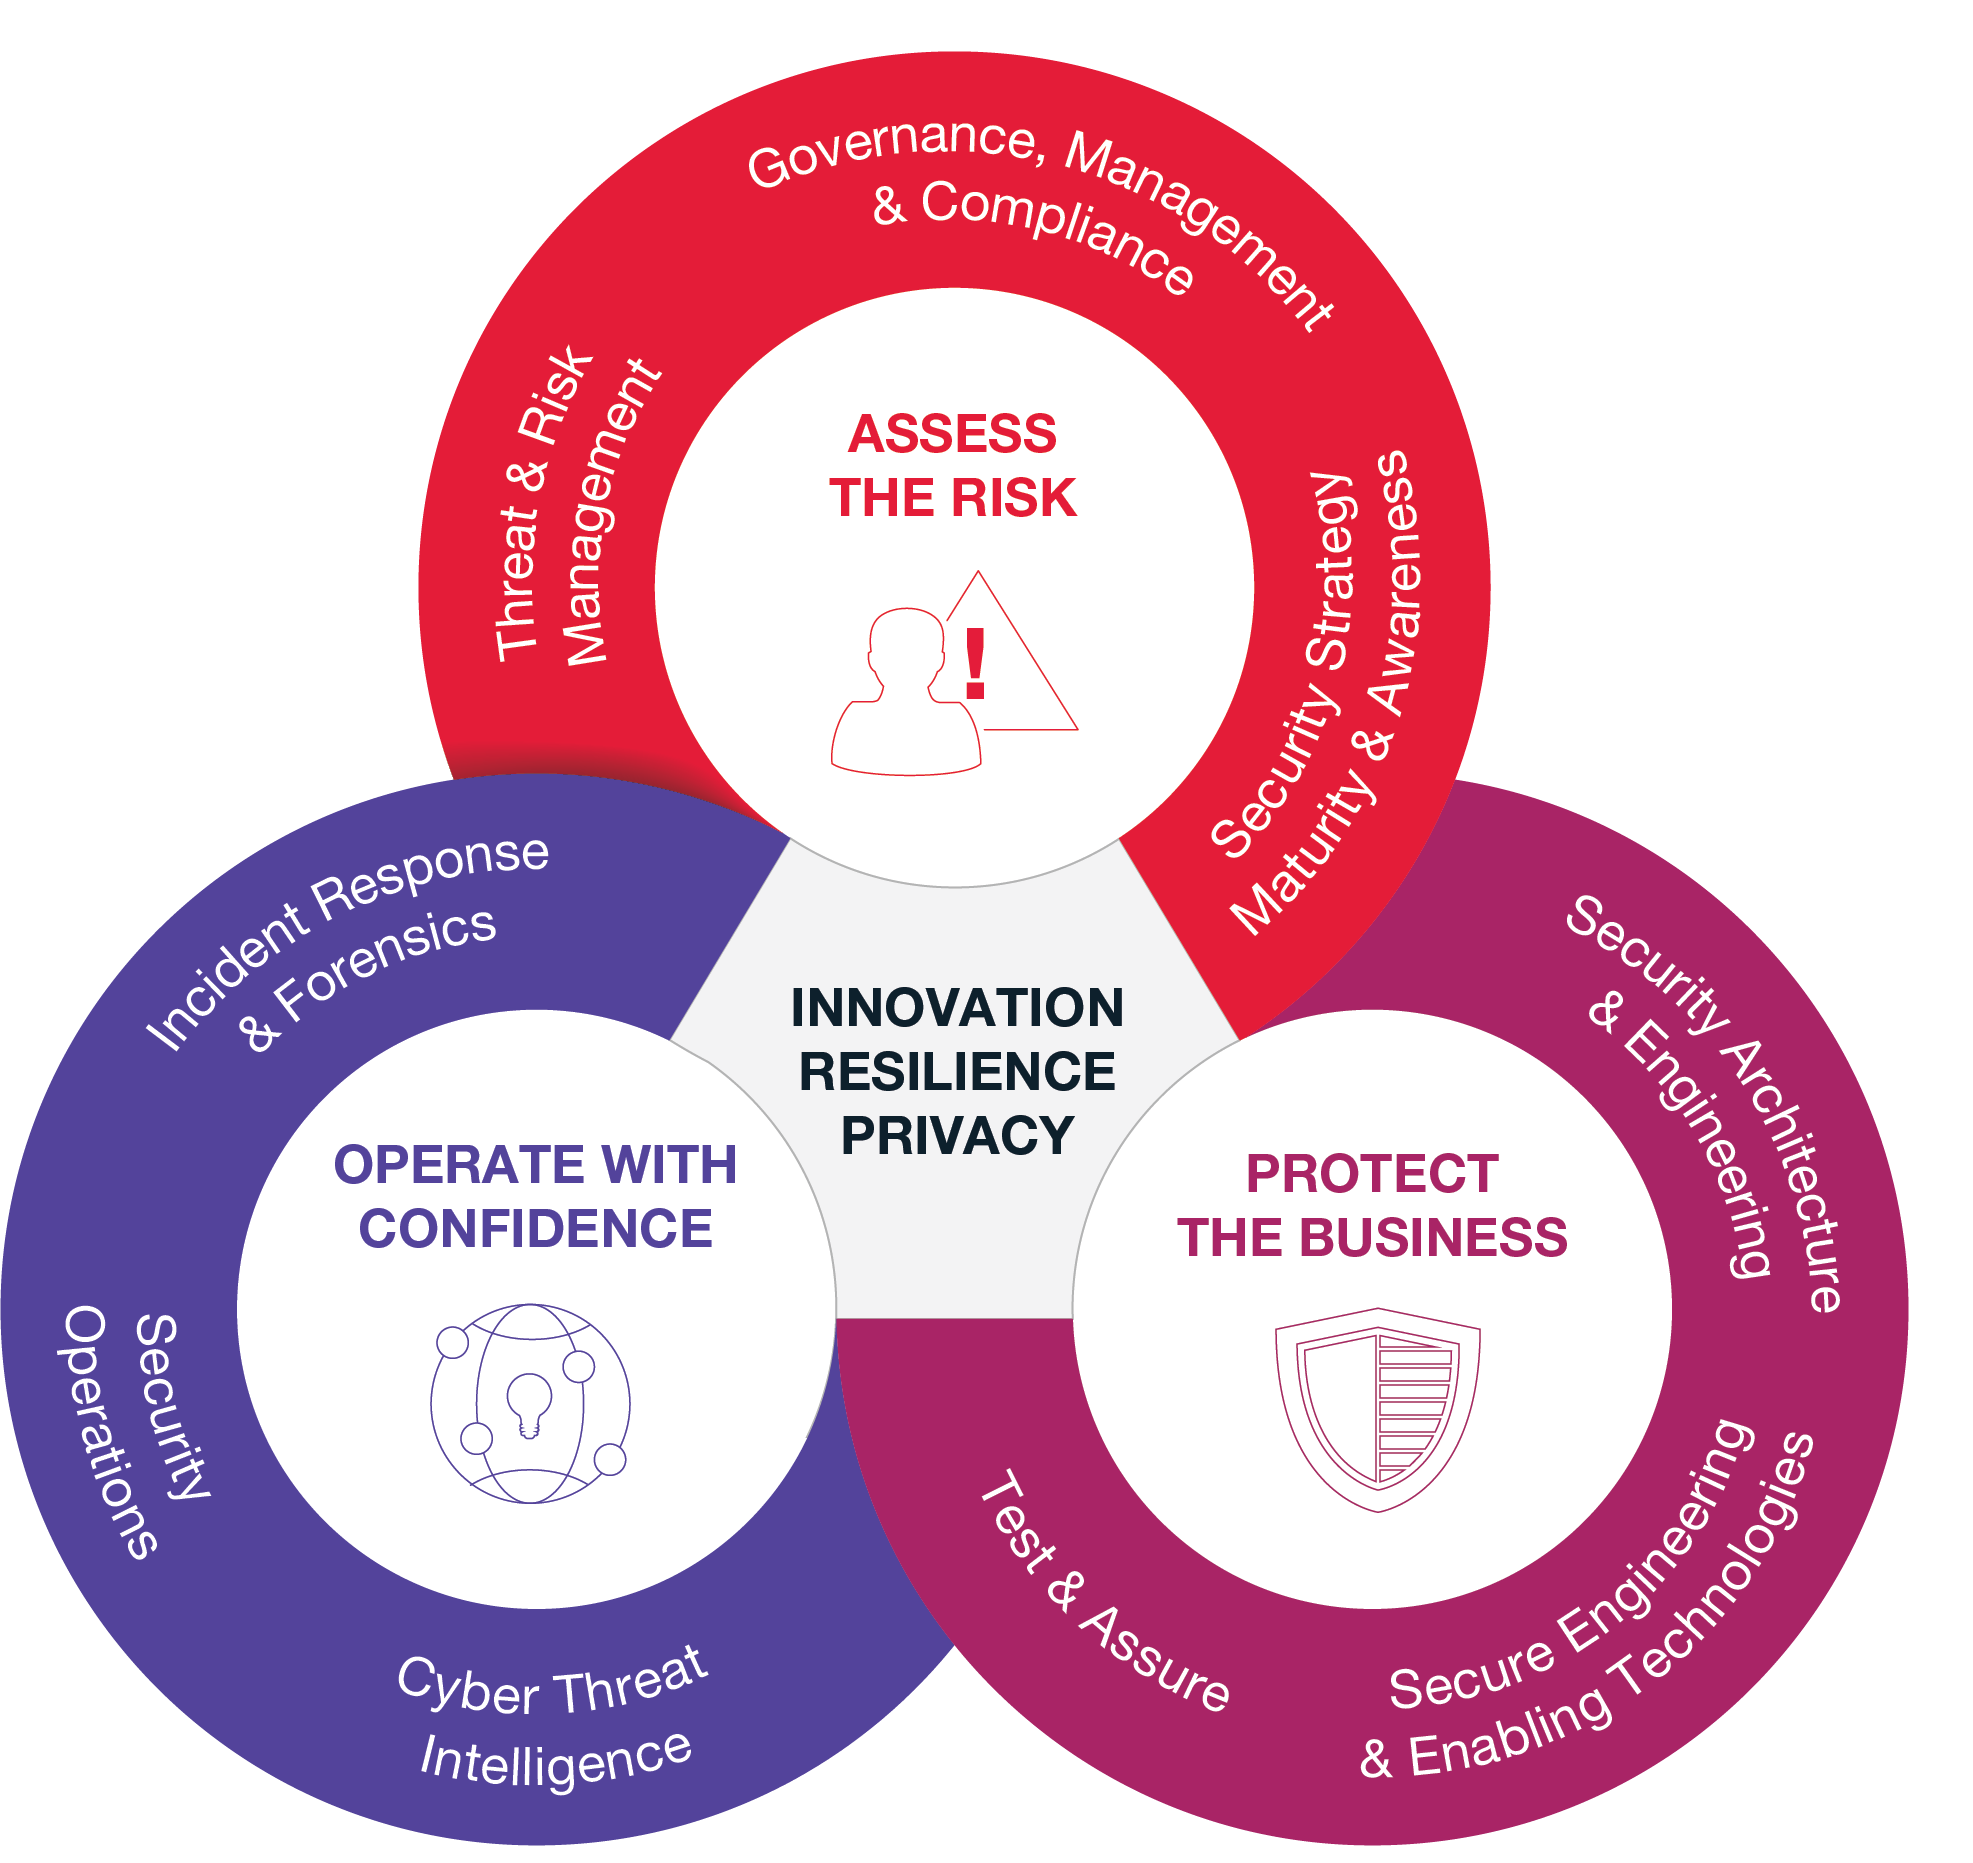 CGI Cyber Security – Assess, protect and operate with confidence